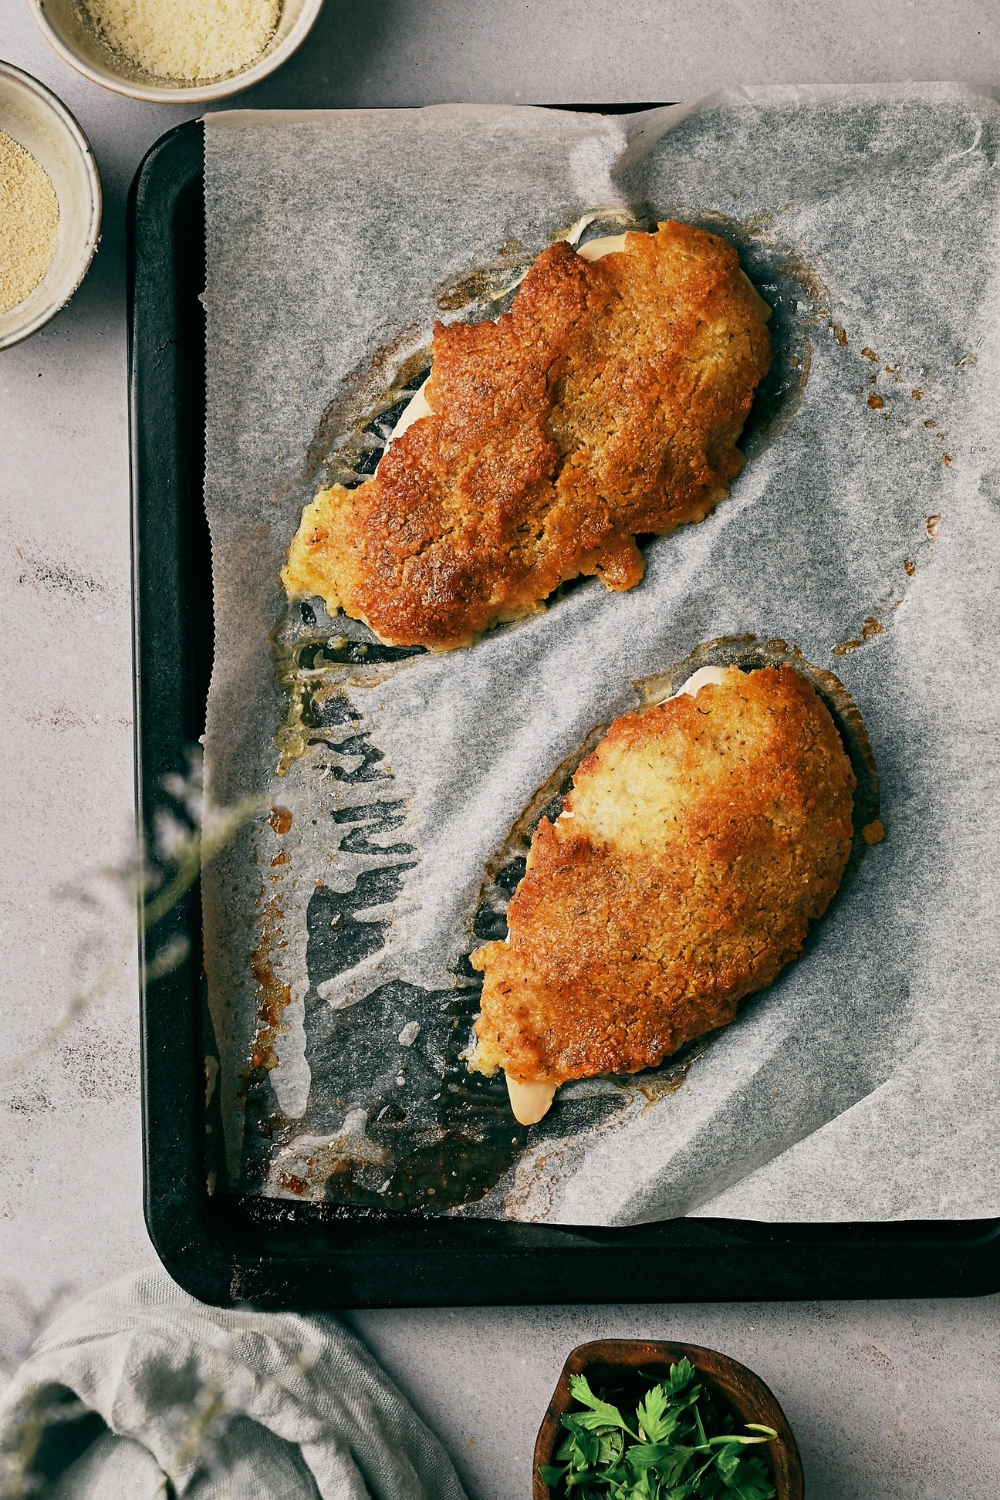 Two freshly baked and breaded chicken breasts on a baking sheet lined with parchment paper.